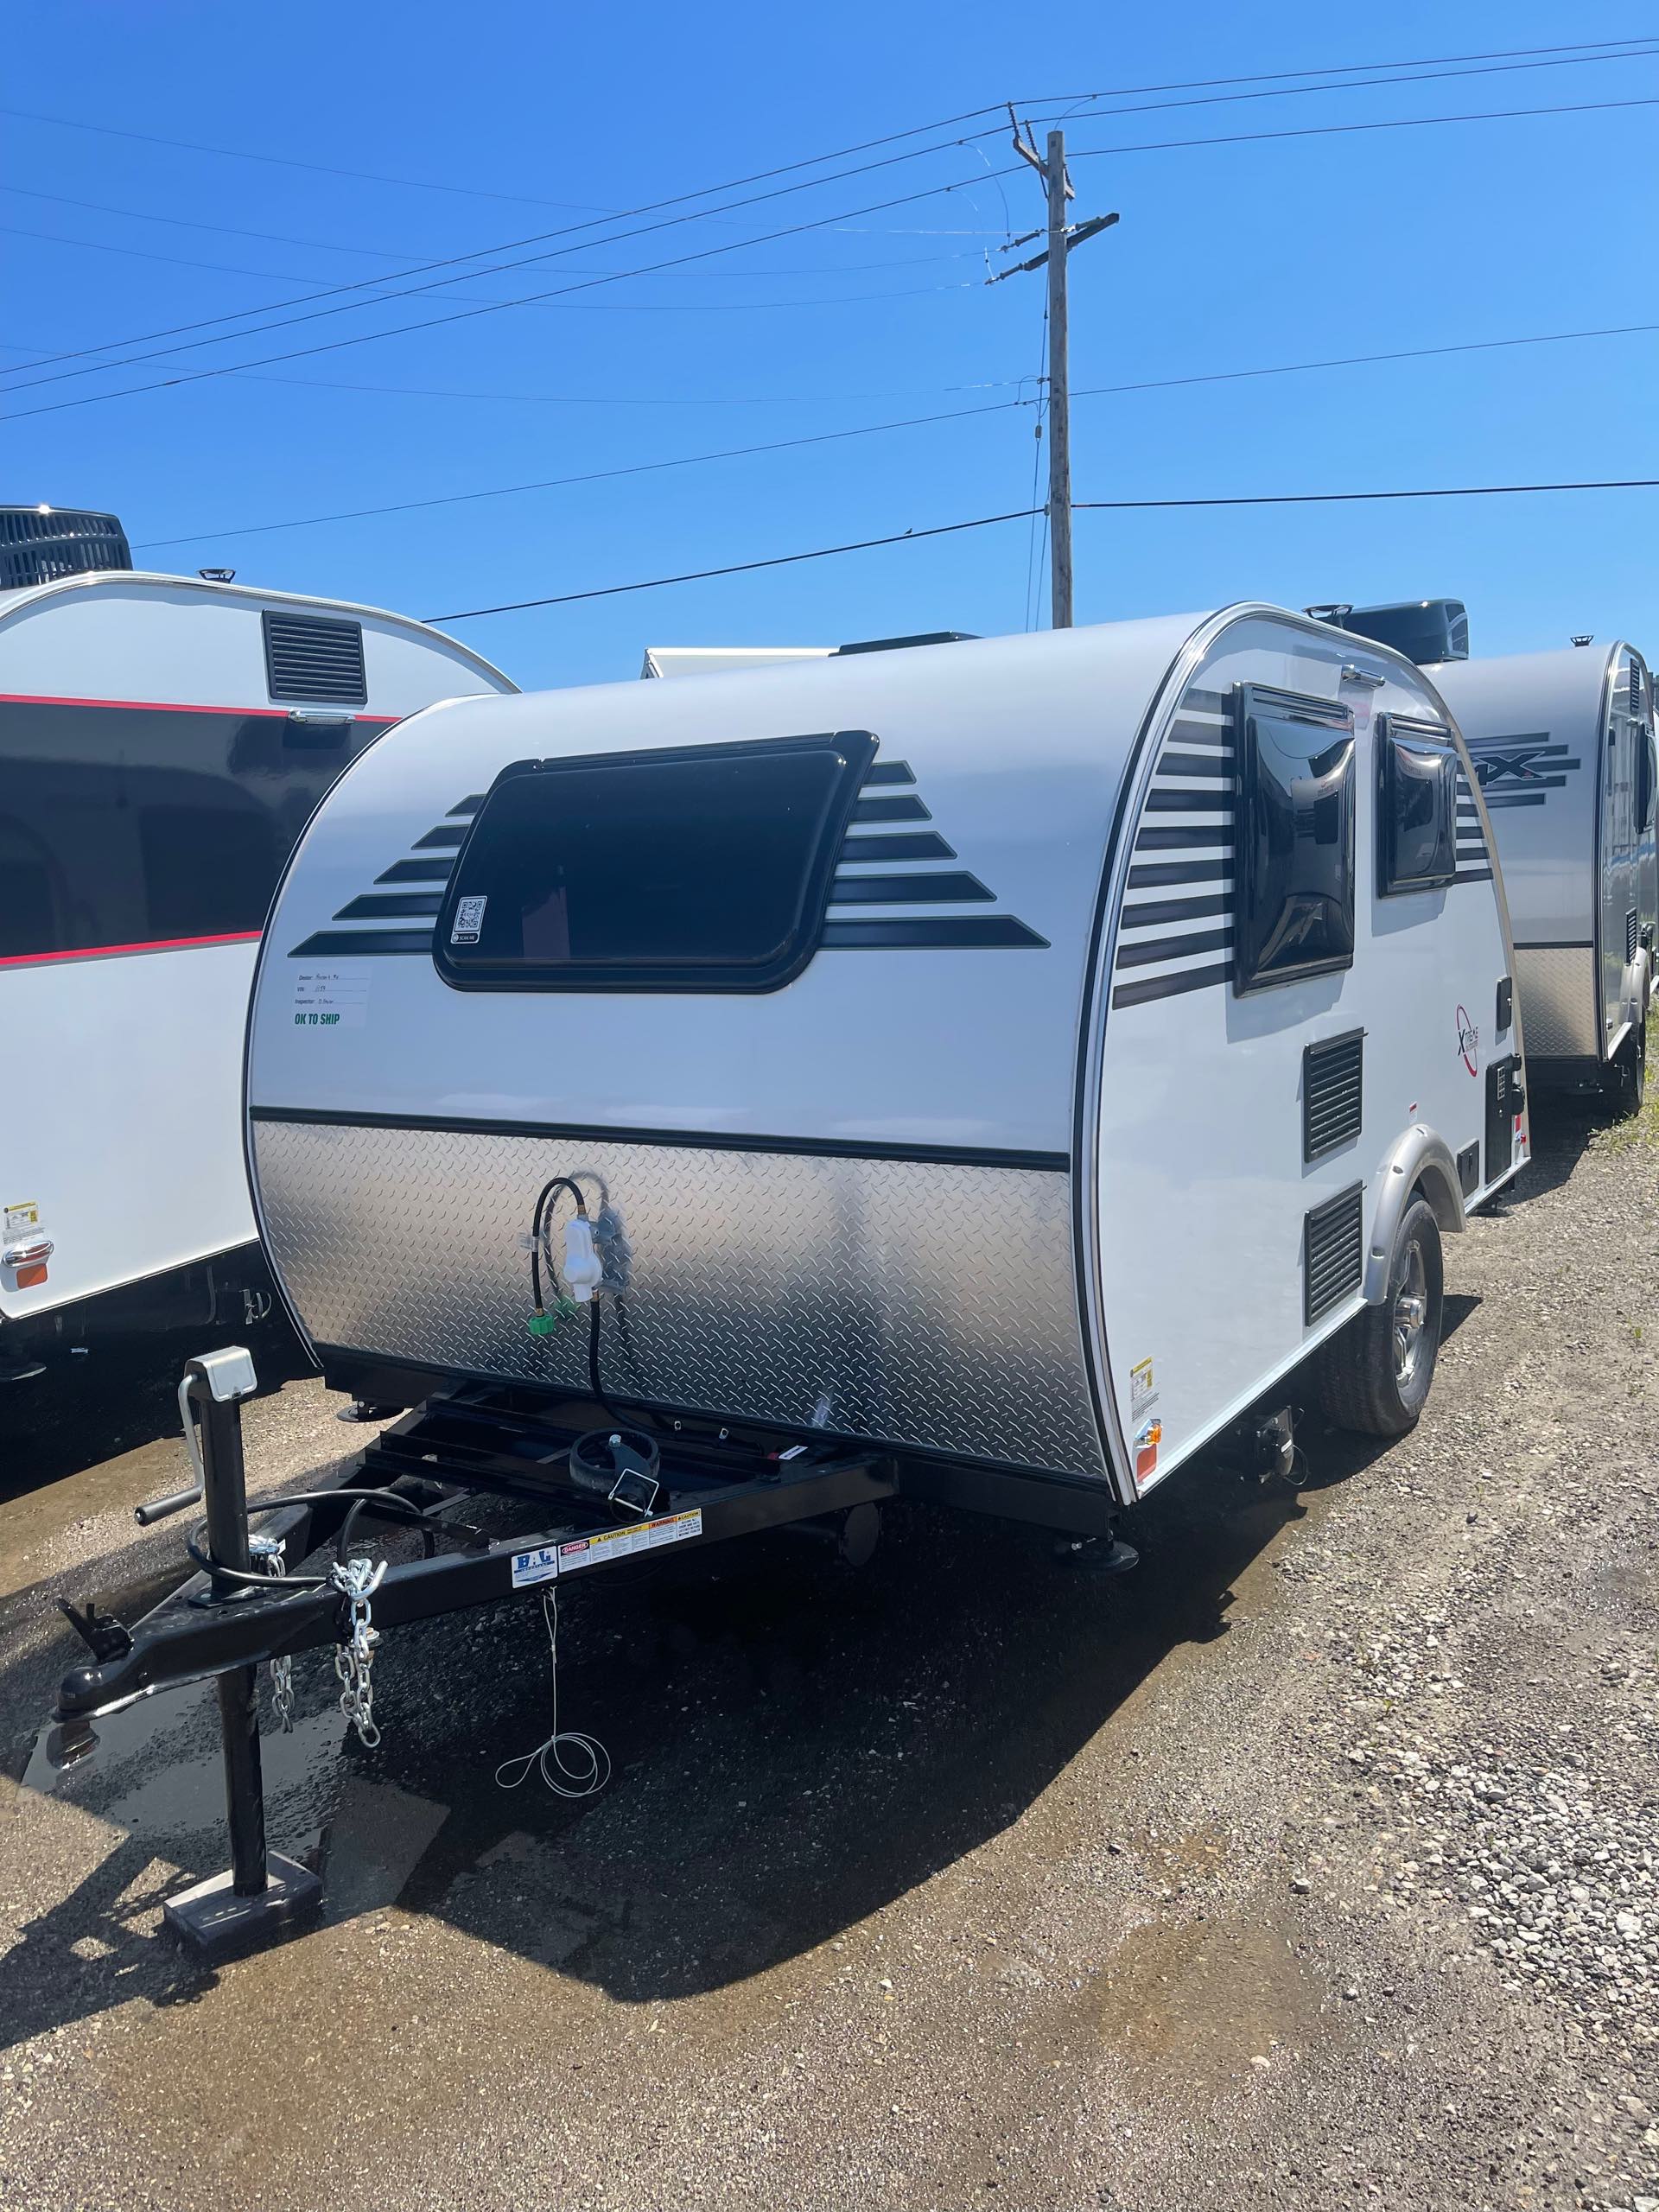 2022 LITTLE GUY MICRO MAX at Prosser's Premium RV Outlet